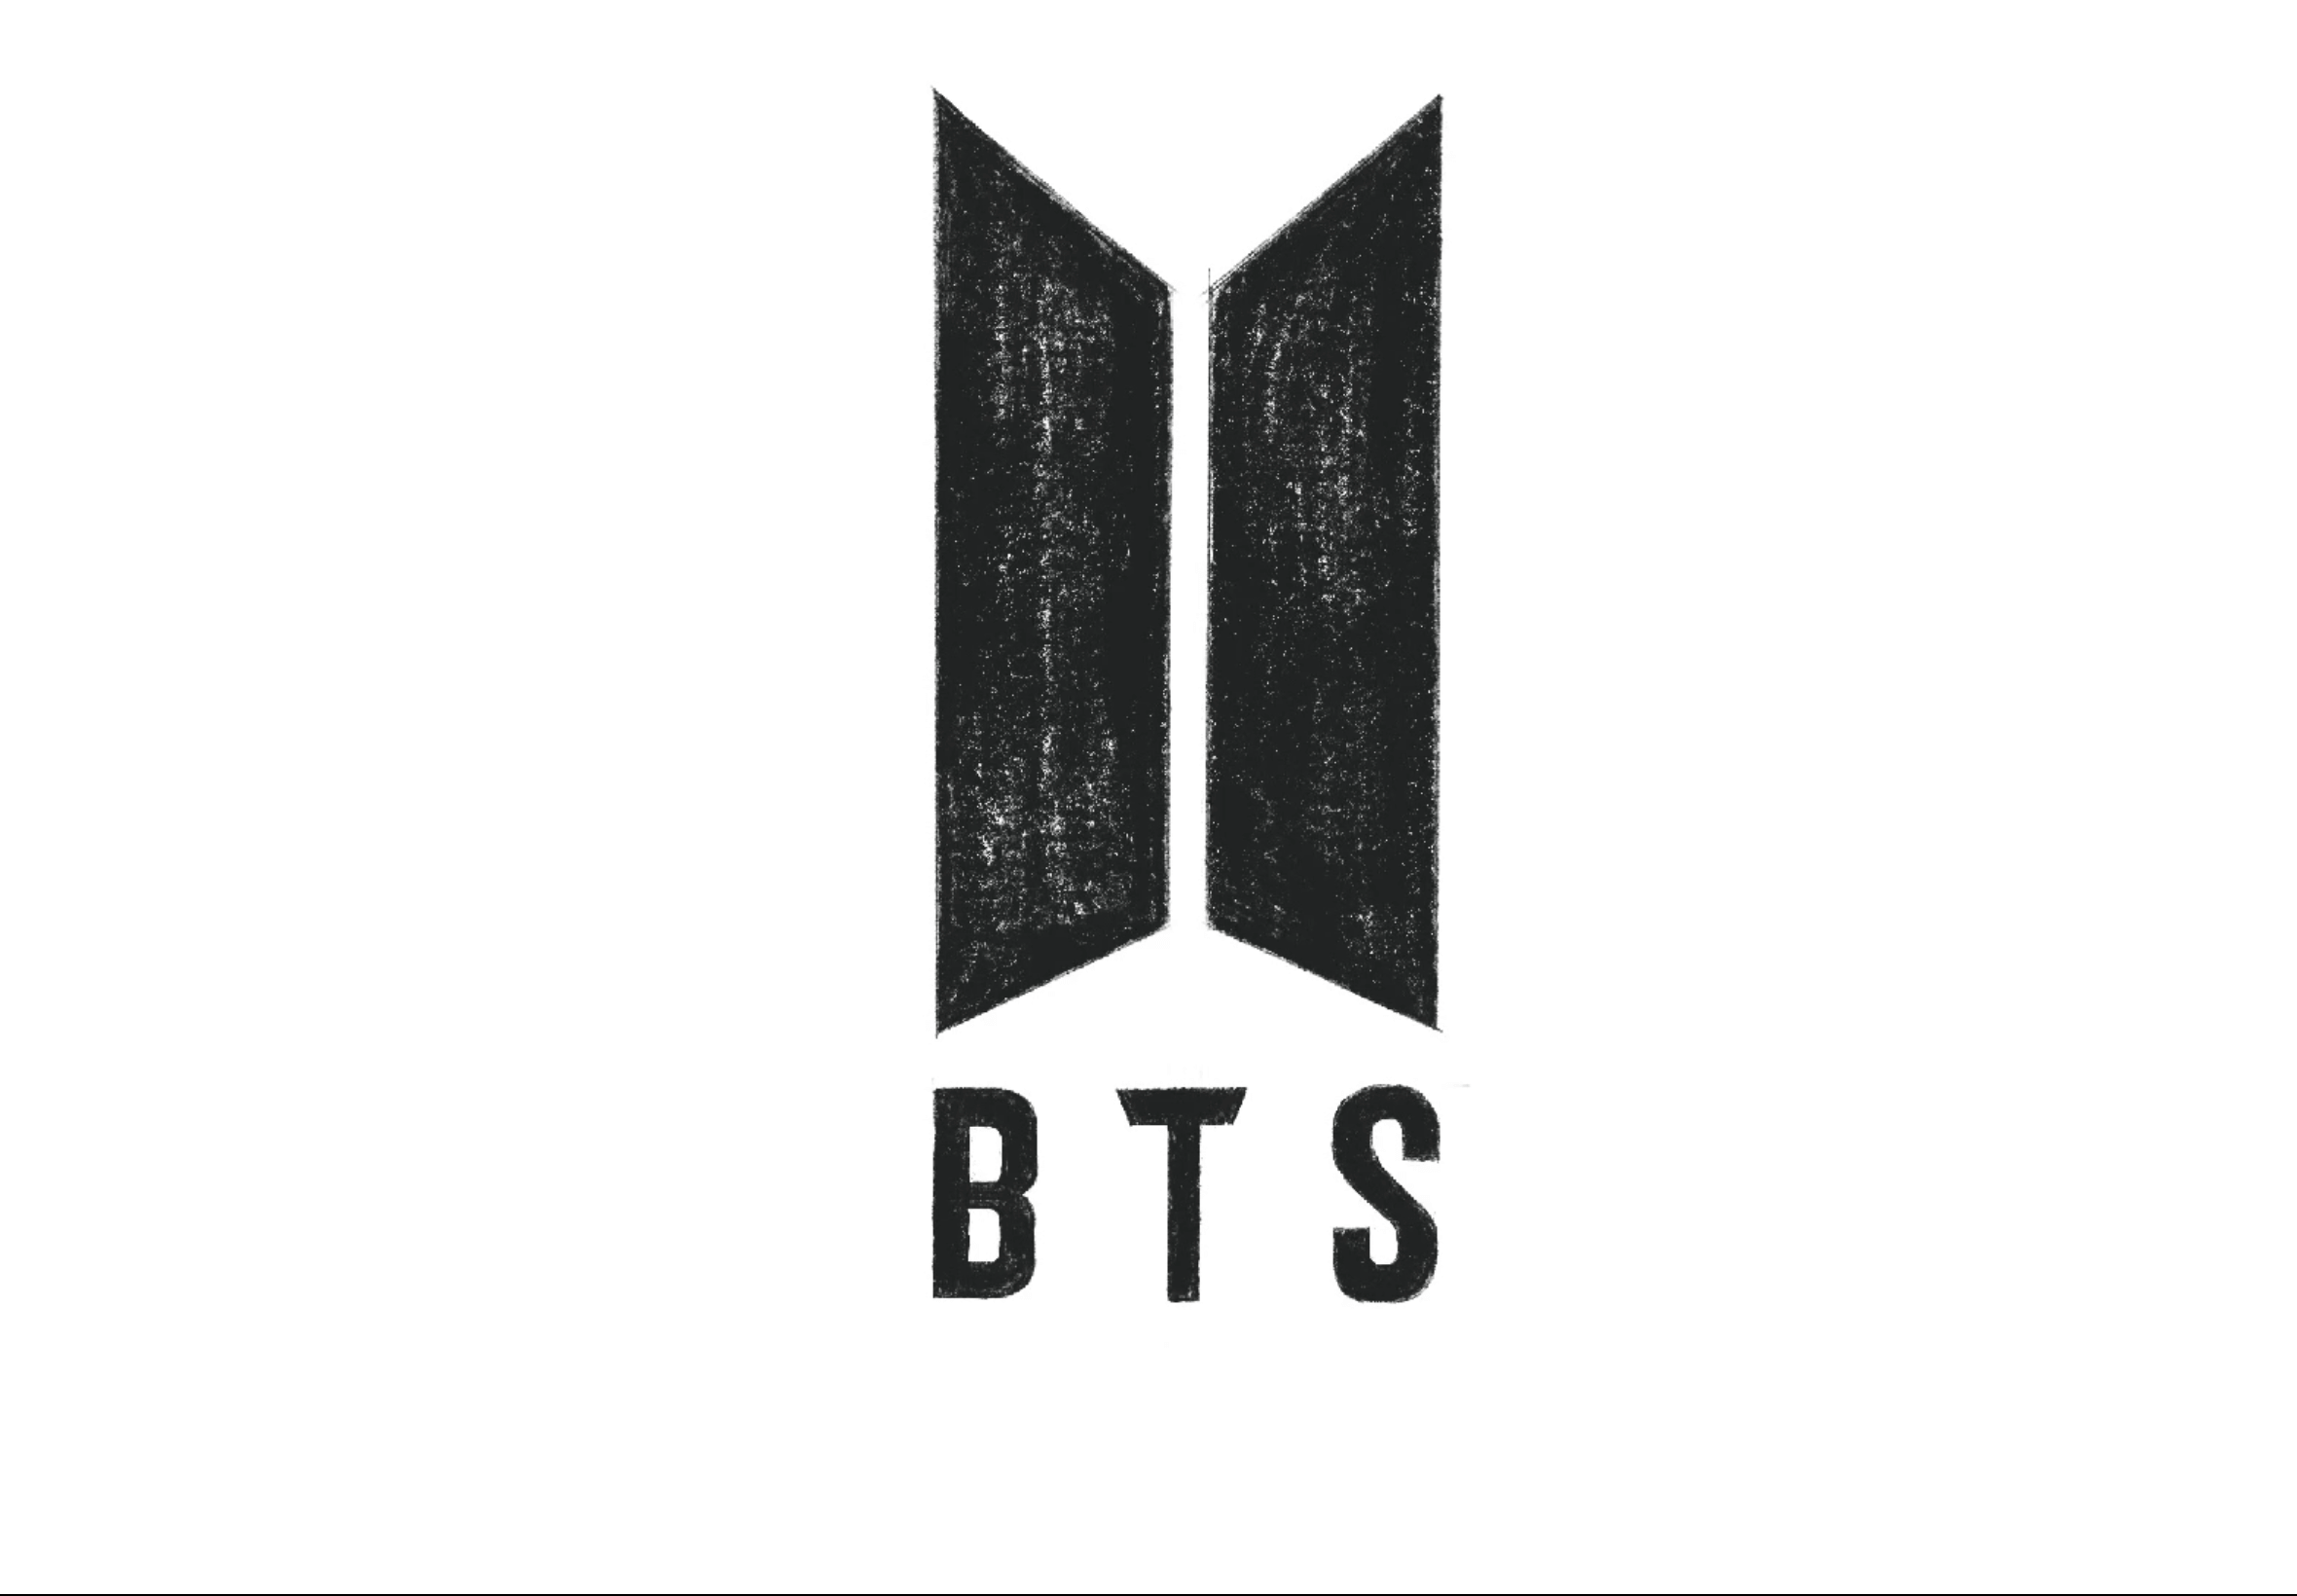 Step 4 of drawing the BTS logo: Fill in the Symbol and BTS Letters